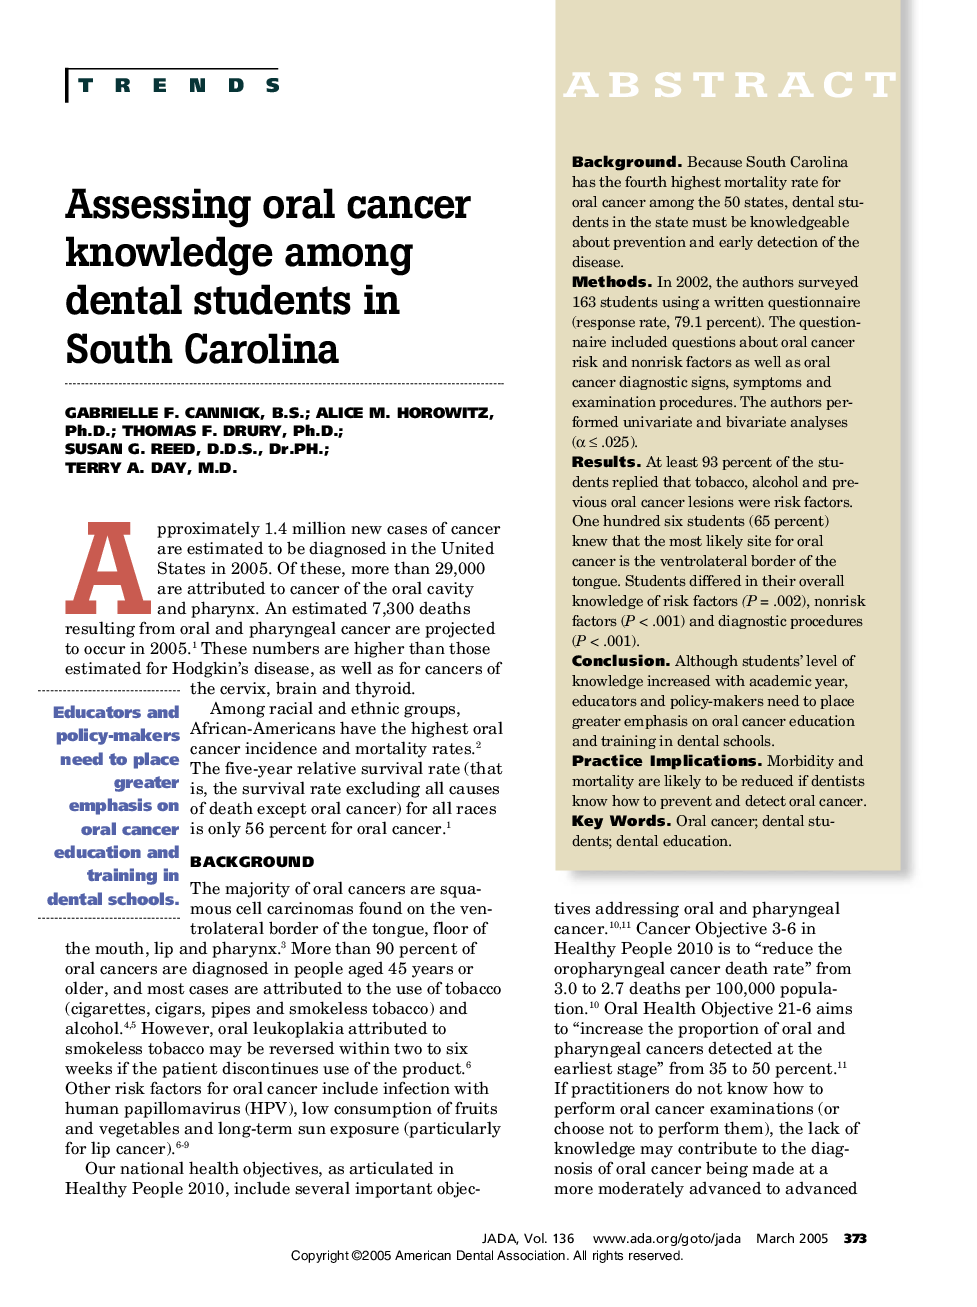 Assessing oral cancer knowledge among dental students in South Carolina